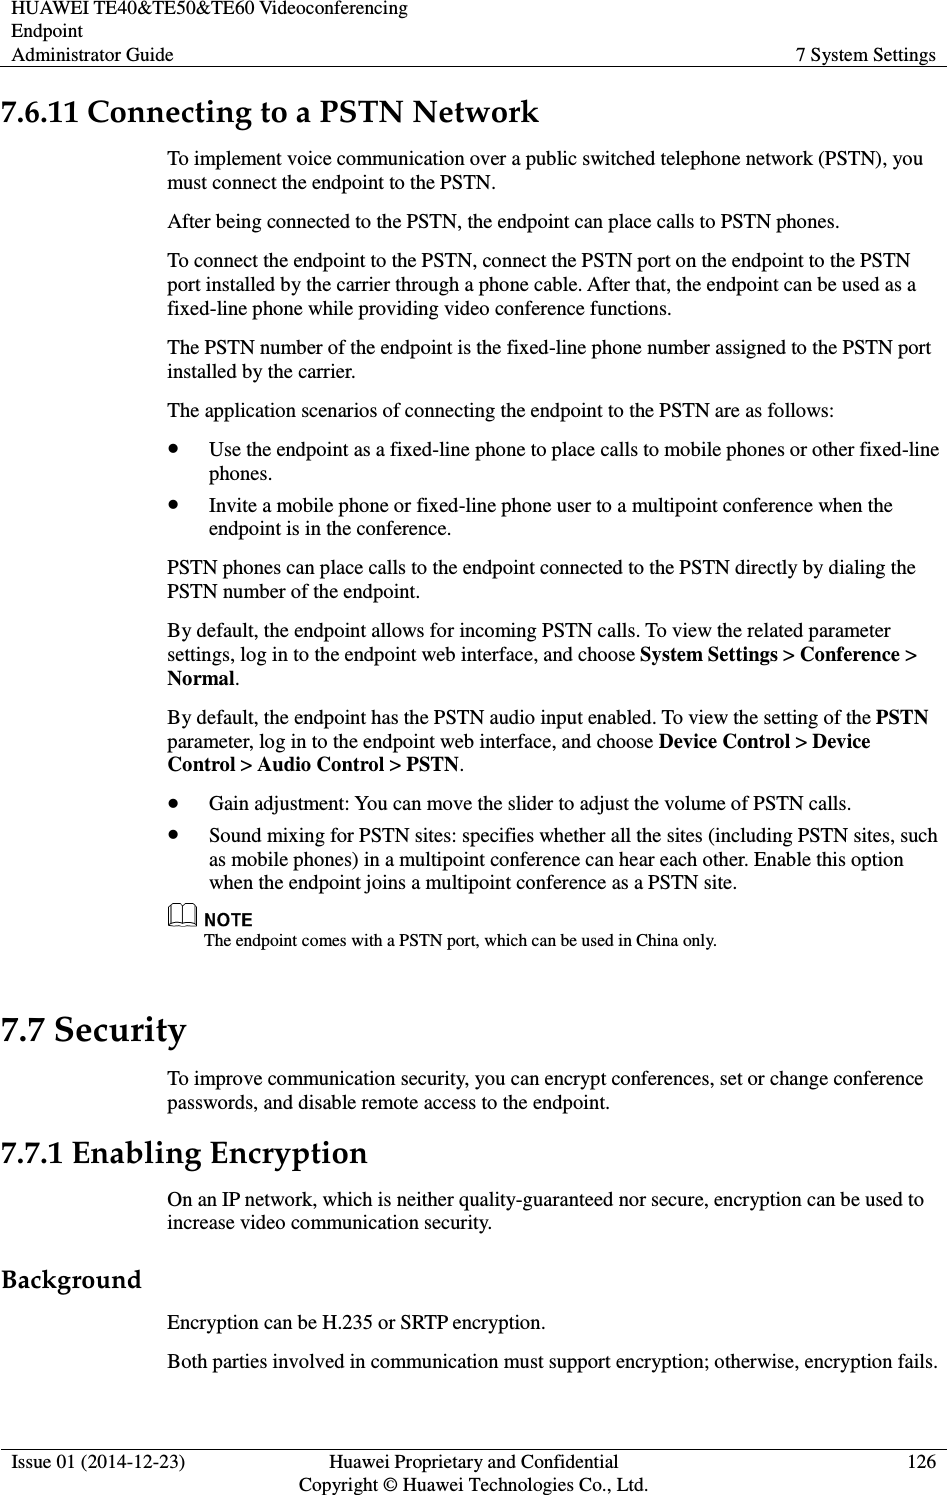 HUAWEI TE40&amp;TE50&amp;TE60 Videoconferencing Endpoint Administrator Guide  7 System Settings  Issue 01 (2014-12-23)  Huawei Proprietary and Confidential                                     Copyright © Huawei Technologies Co., Ltd. 126  7.6.11 Connecting to a PSTN Network To implement voice communication over a public switched telephone network (PSTN), you must connect the endpoint to the PSTN. After being connected to the PSTN, the endpoint can place calls to PSTN phones.   To connect the endpoint to the PSTN, connect the PSTN port on the endpoint to the PSTN port installed by the carrier through a phone cable. After that, the endpoint can be used as a fixed-line phone while providing video conference functions. The PSTN number of the endpoint is the fixed-line phone number assigned to the PSTN port installed by the carrier. The application scenarios of connecting the endpoint to the PSTN are as follows:  Use the endpoint as a fixed-line phone to place calls to mobile phones or other fixed-line phones.  Invite a mobile phone or fixed-line phone user to a multipoint conference when the endpoint is in the conference. PSTN phones can place calls to the endpoint connected to the PSTN directly by dialing the PSTN number of the endpoint. By default, the endpoint allows for incoming PSTN calls. To view the related parameter settings, log in to the endpoint web interface, and choose System Settings &gt; Conference &gt; Normal. By default, the endpoint has the PSTN audio input enabled. To view the setting of the PSTN parameter, log in to the endpoint web interface, and choose Device Control &gt; Device Control &gt; Audio Control &gt; PSTN.  Gain adjustment: You can move the slider to adjust the volume of PSTN calls.  Sound mixing for PSTN sites: specifies whether all the sites (including PSTN sites, such as mobile phones) in a multipoint conference can hear each other. Enable this option when the endpoint joins a multipoint conference as a PSTN site.    The endpoint comes with a PSTN port, which can be used in China only. 7.7 Security To improve communication security, you can encrypt conferences, set or change conference passwords, and disable remote access to the endpoint. 7.7.1 Enabling Encryption On an IP network, which is neither quality-guaranteed nor secure, encryption can be used to increase video communication security. Background Encryption can be H.235 or SRTP encryption. Both parties involved in communication must support encryption; otherwise, encryption fails. 